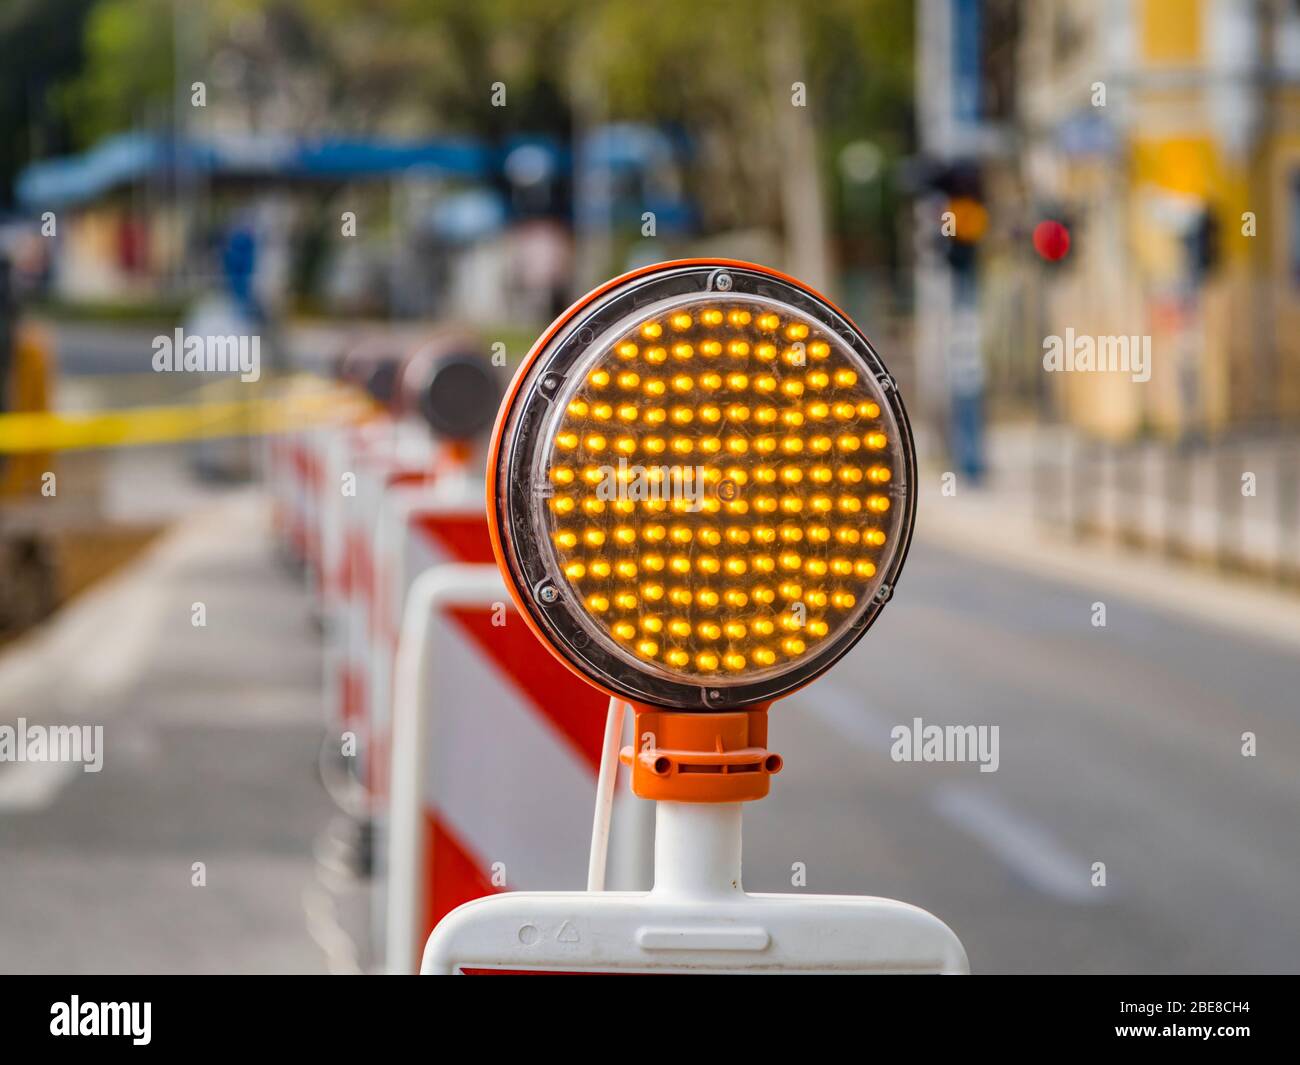 Road multiple Yellow LED lamps circular signal slow traffic warning sign work in progrss Stock Photo